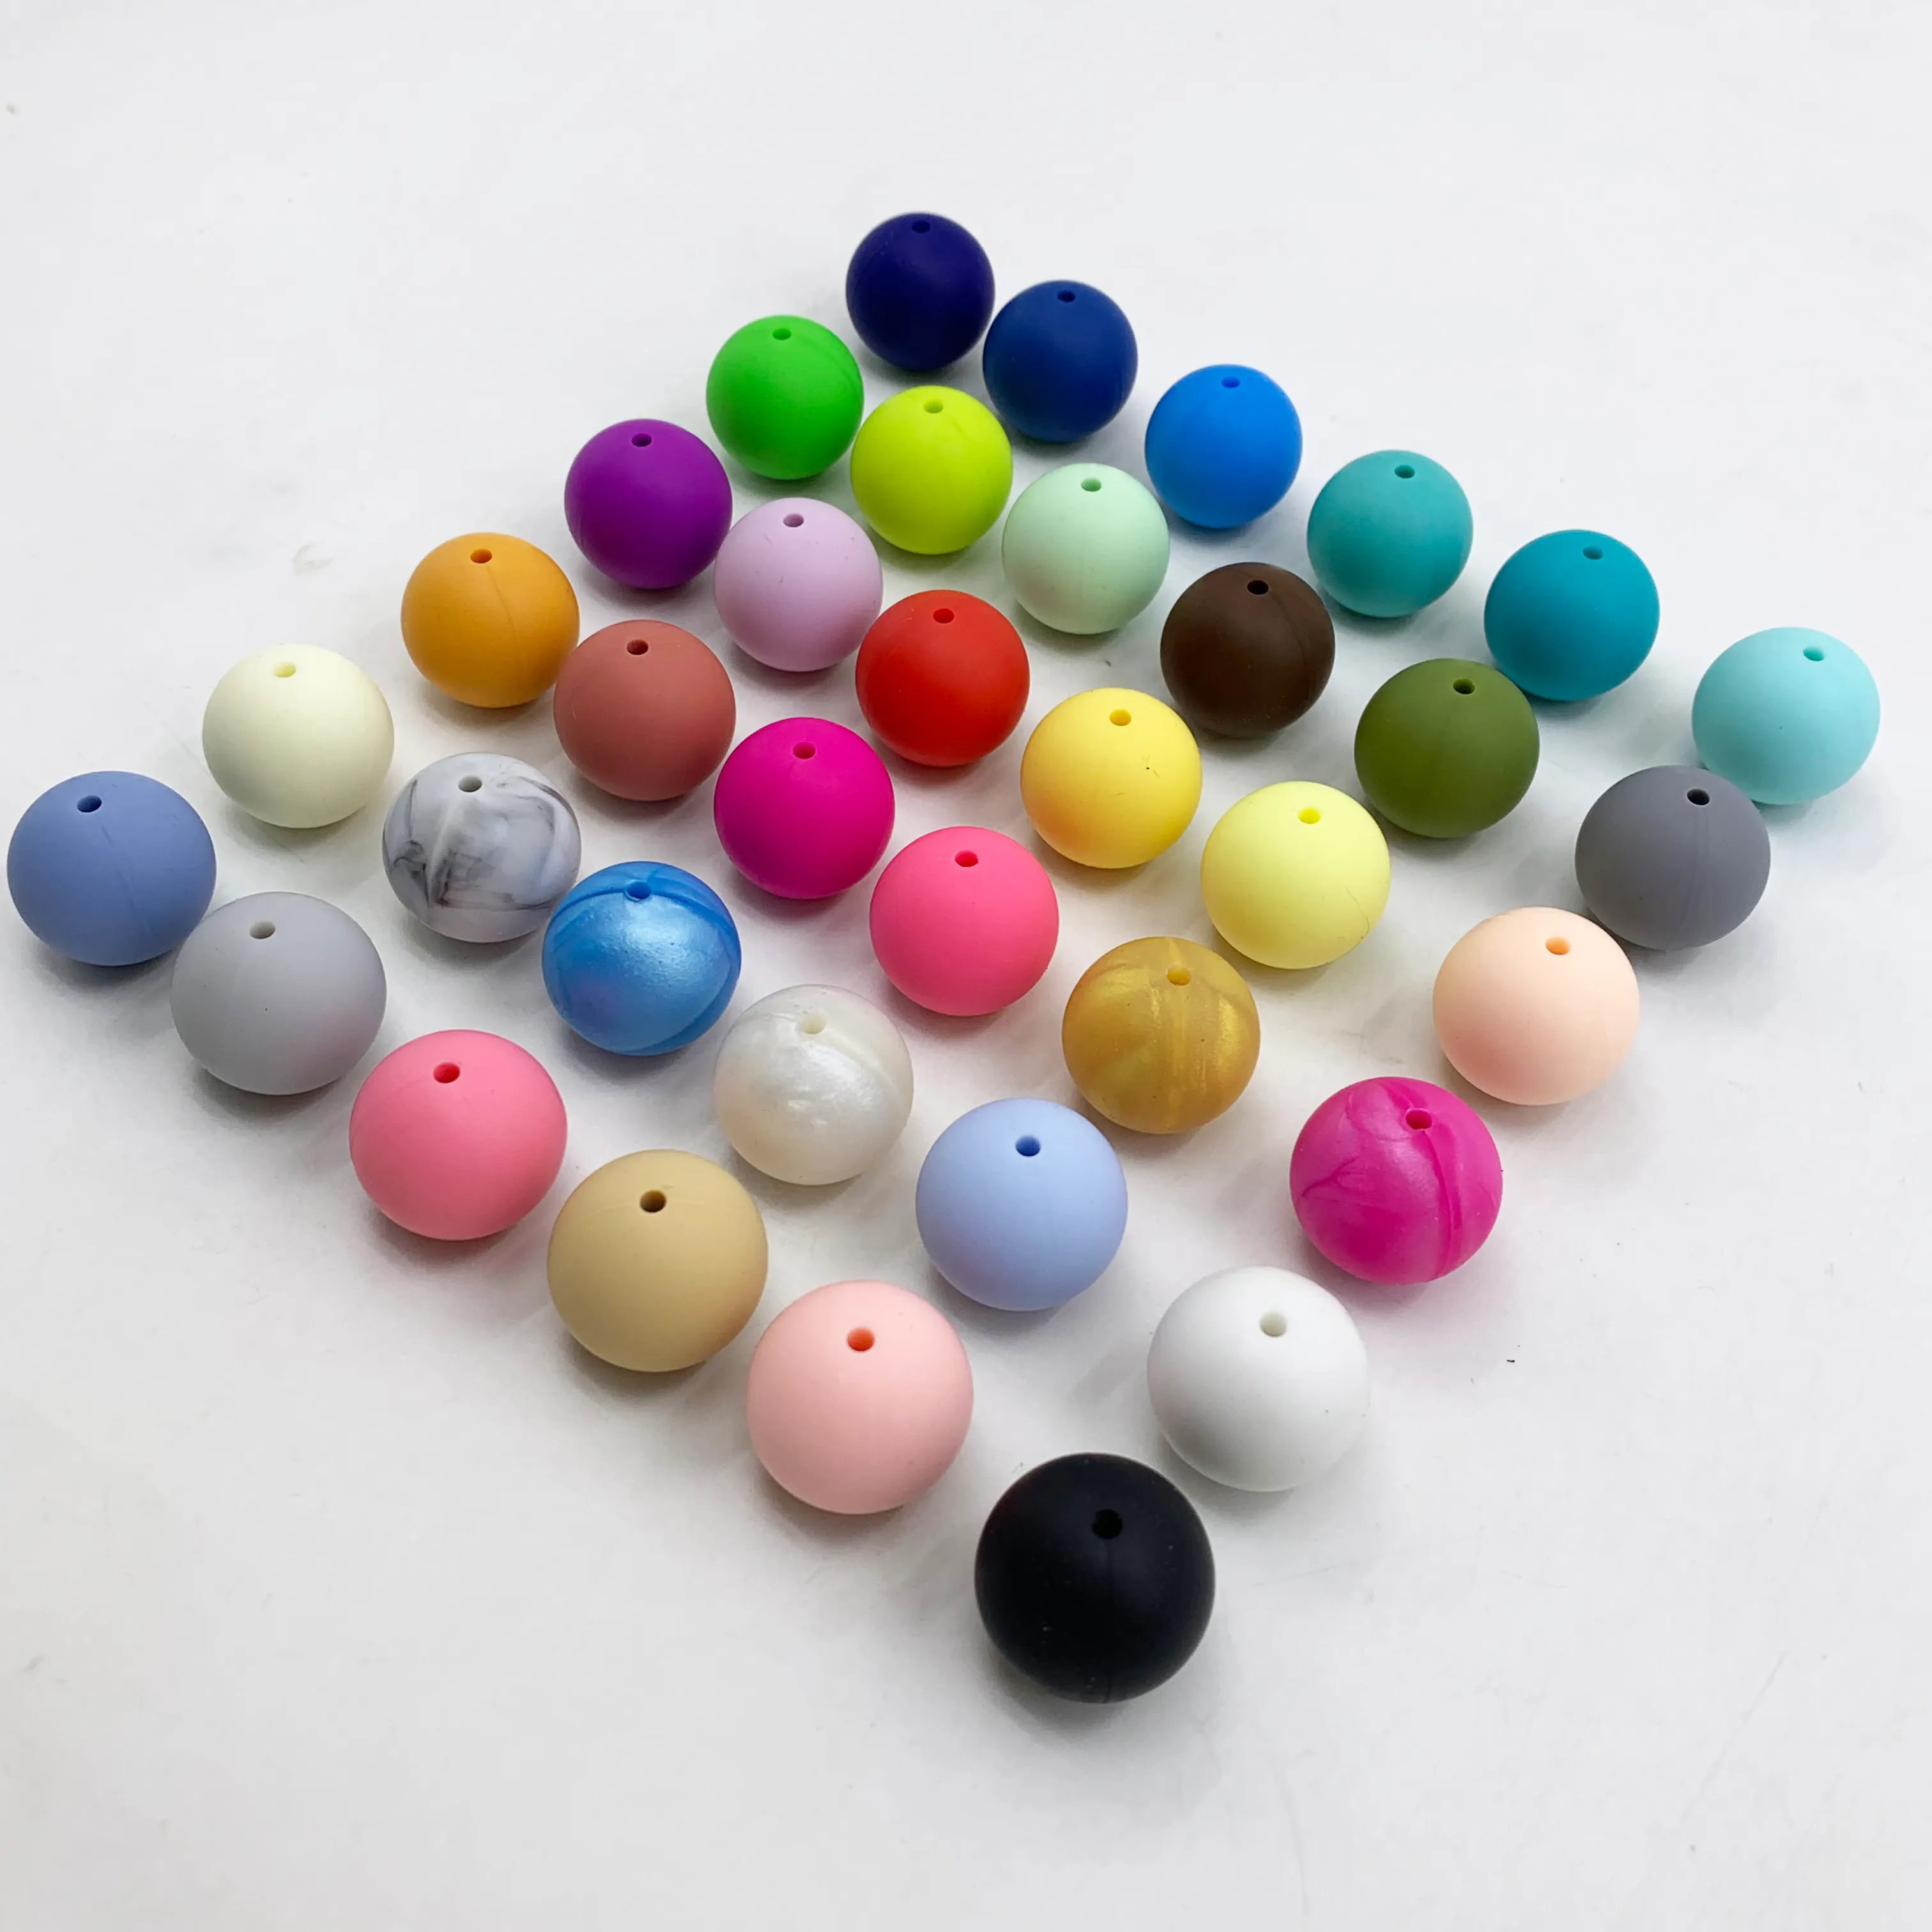 15mm Camo Silicone Beads, Colorful Baby Teething Beads, Beads For Wristlet  Key Chain, Food Grade Beads